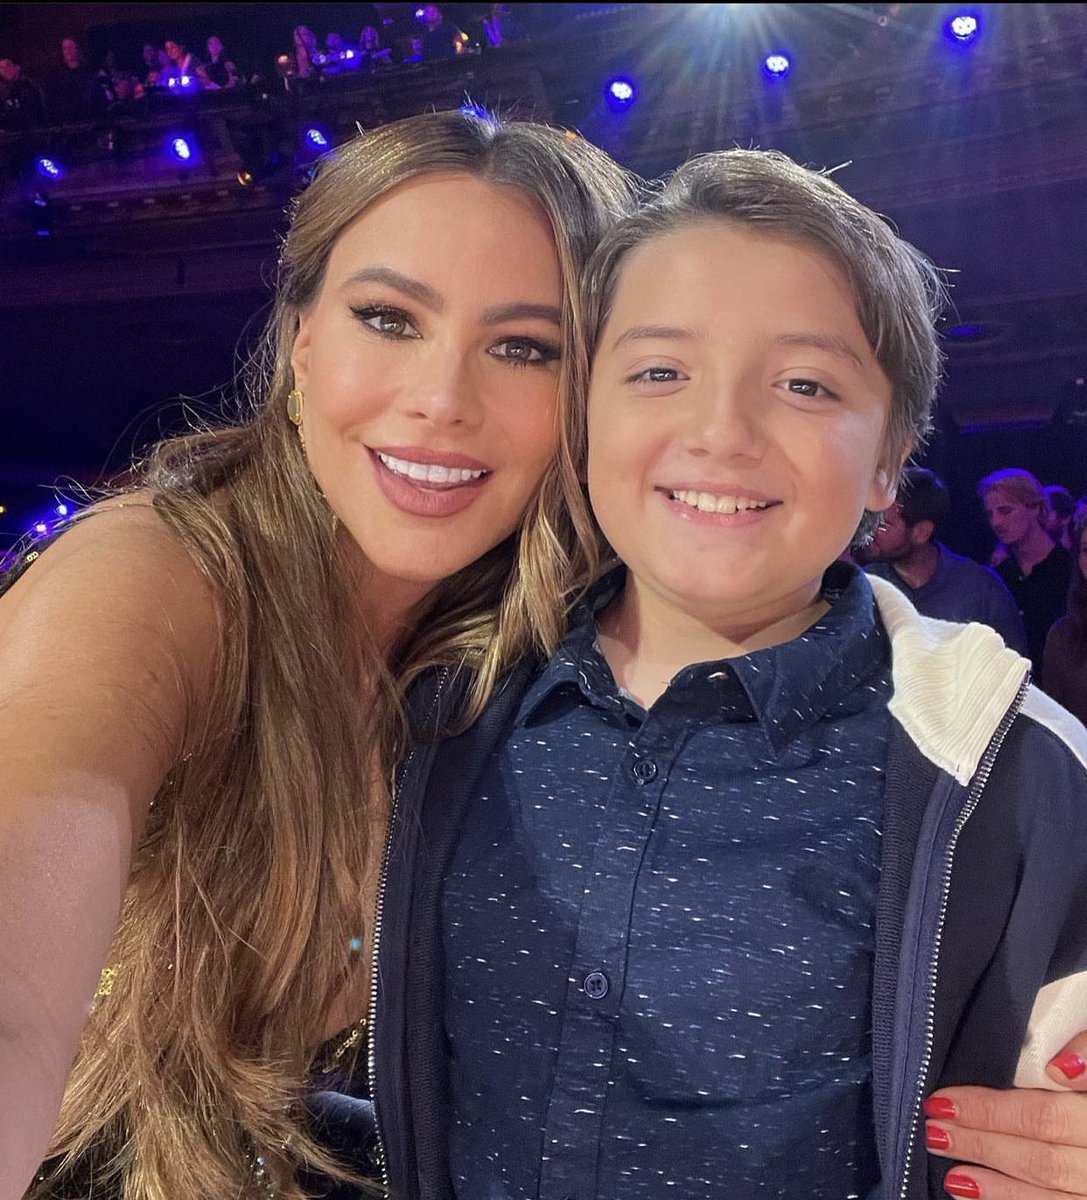 Love when my TV sons visit me at #AGT ❤️❤️❤️❤️ He’s so big now